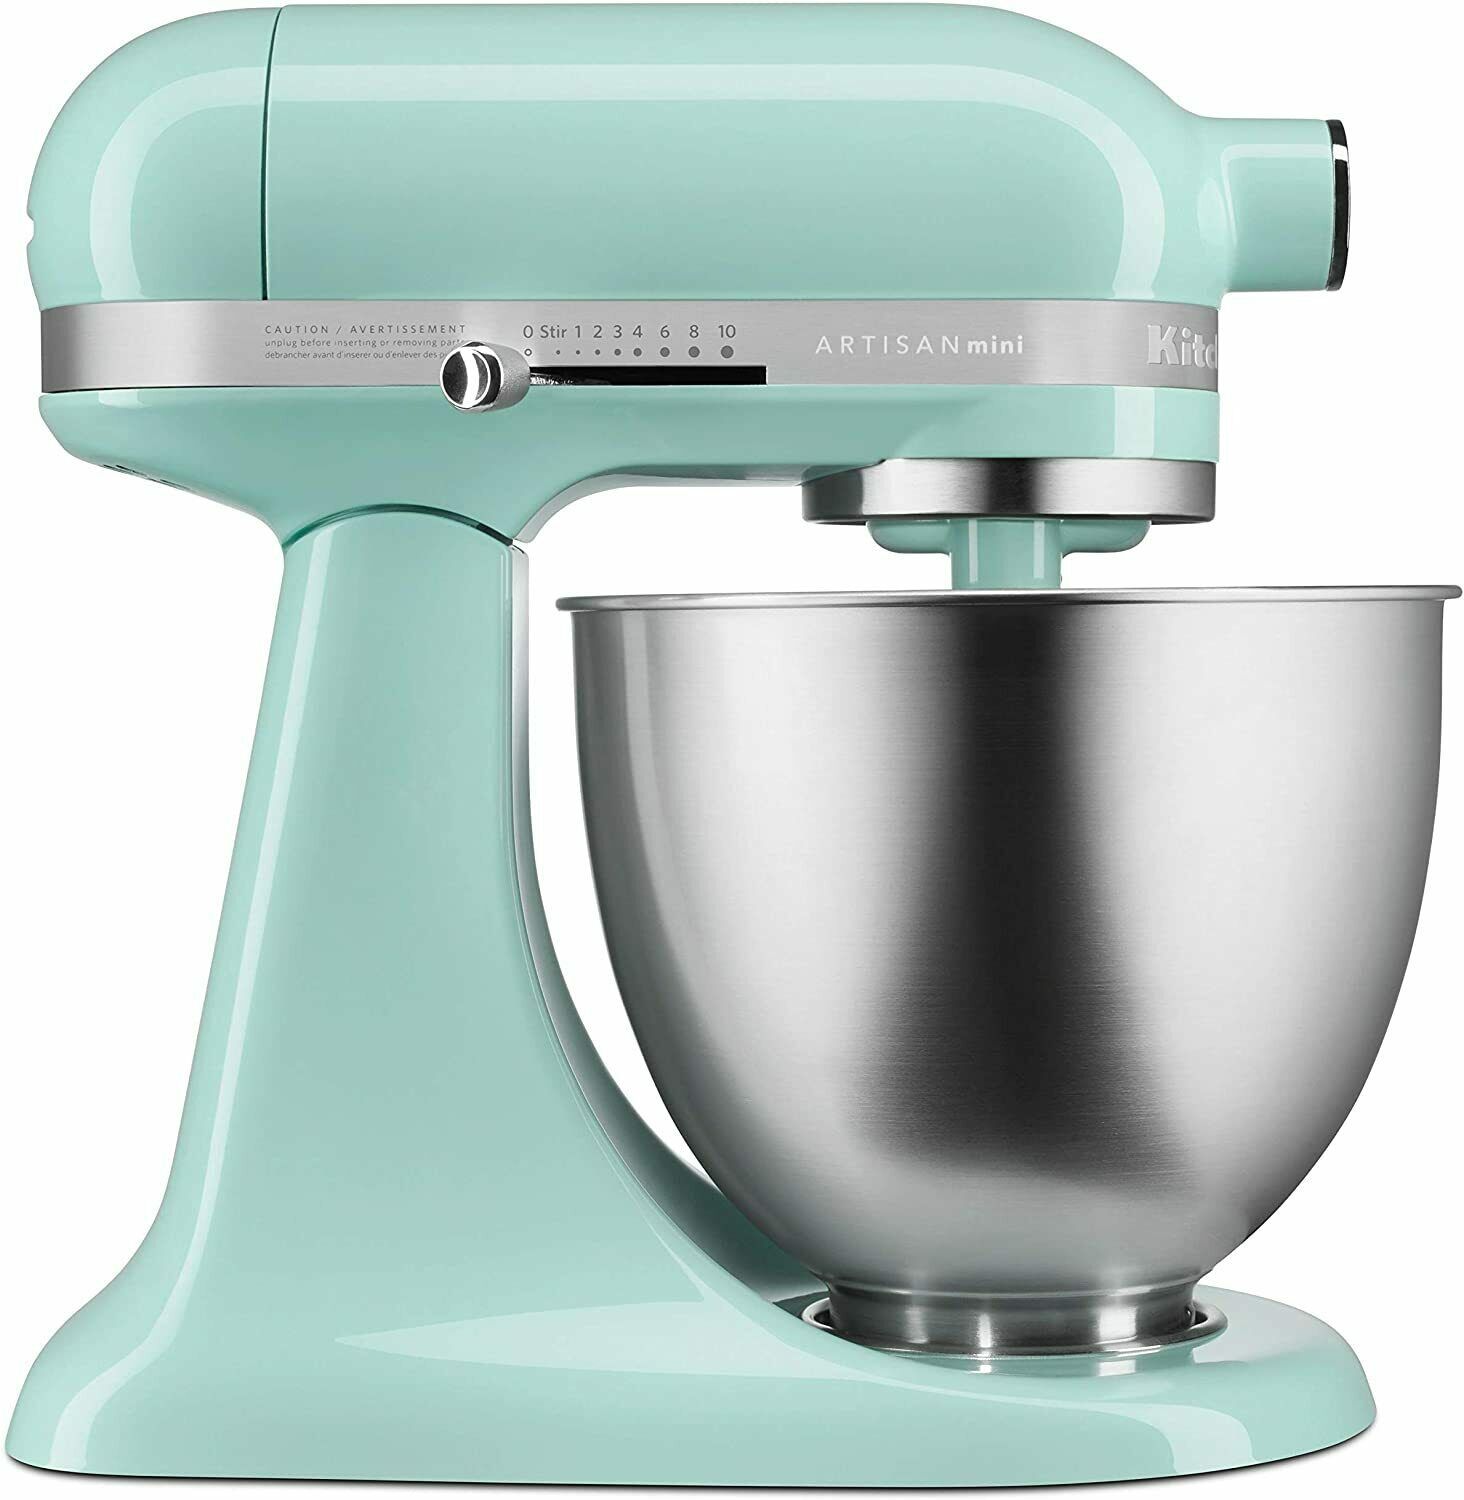 Primary image for KitchenAid Artisan 5qt Tilt-Head Stand Mixer - Ice